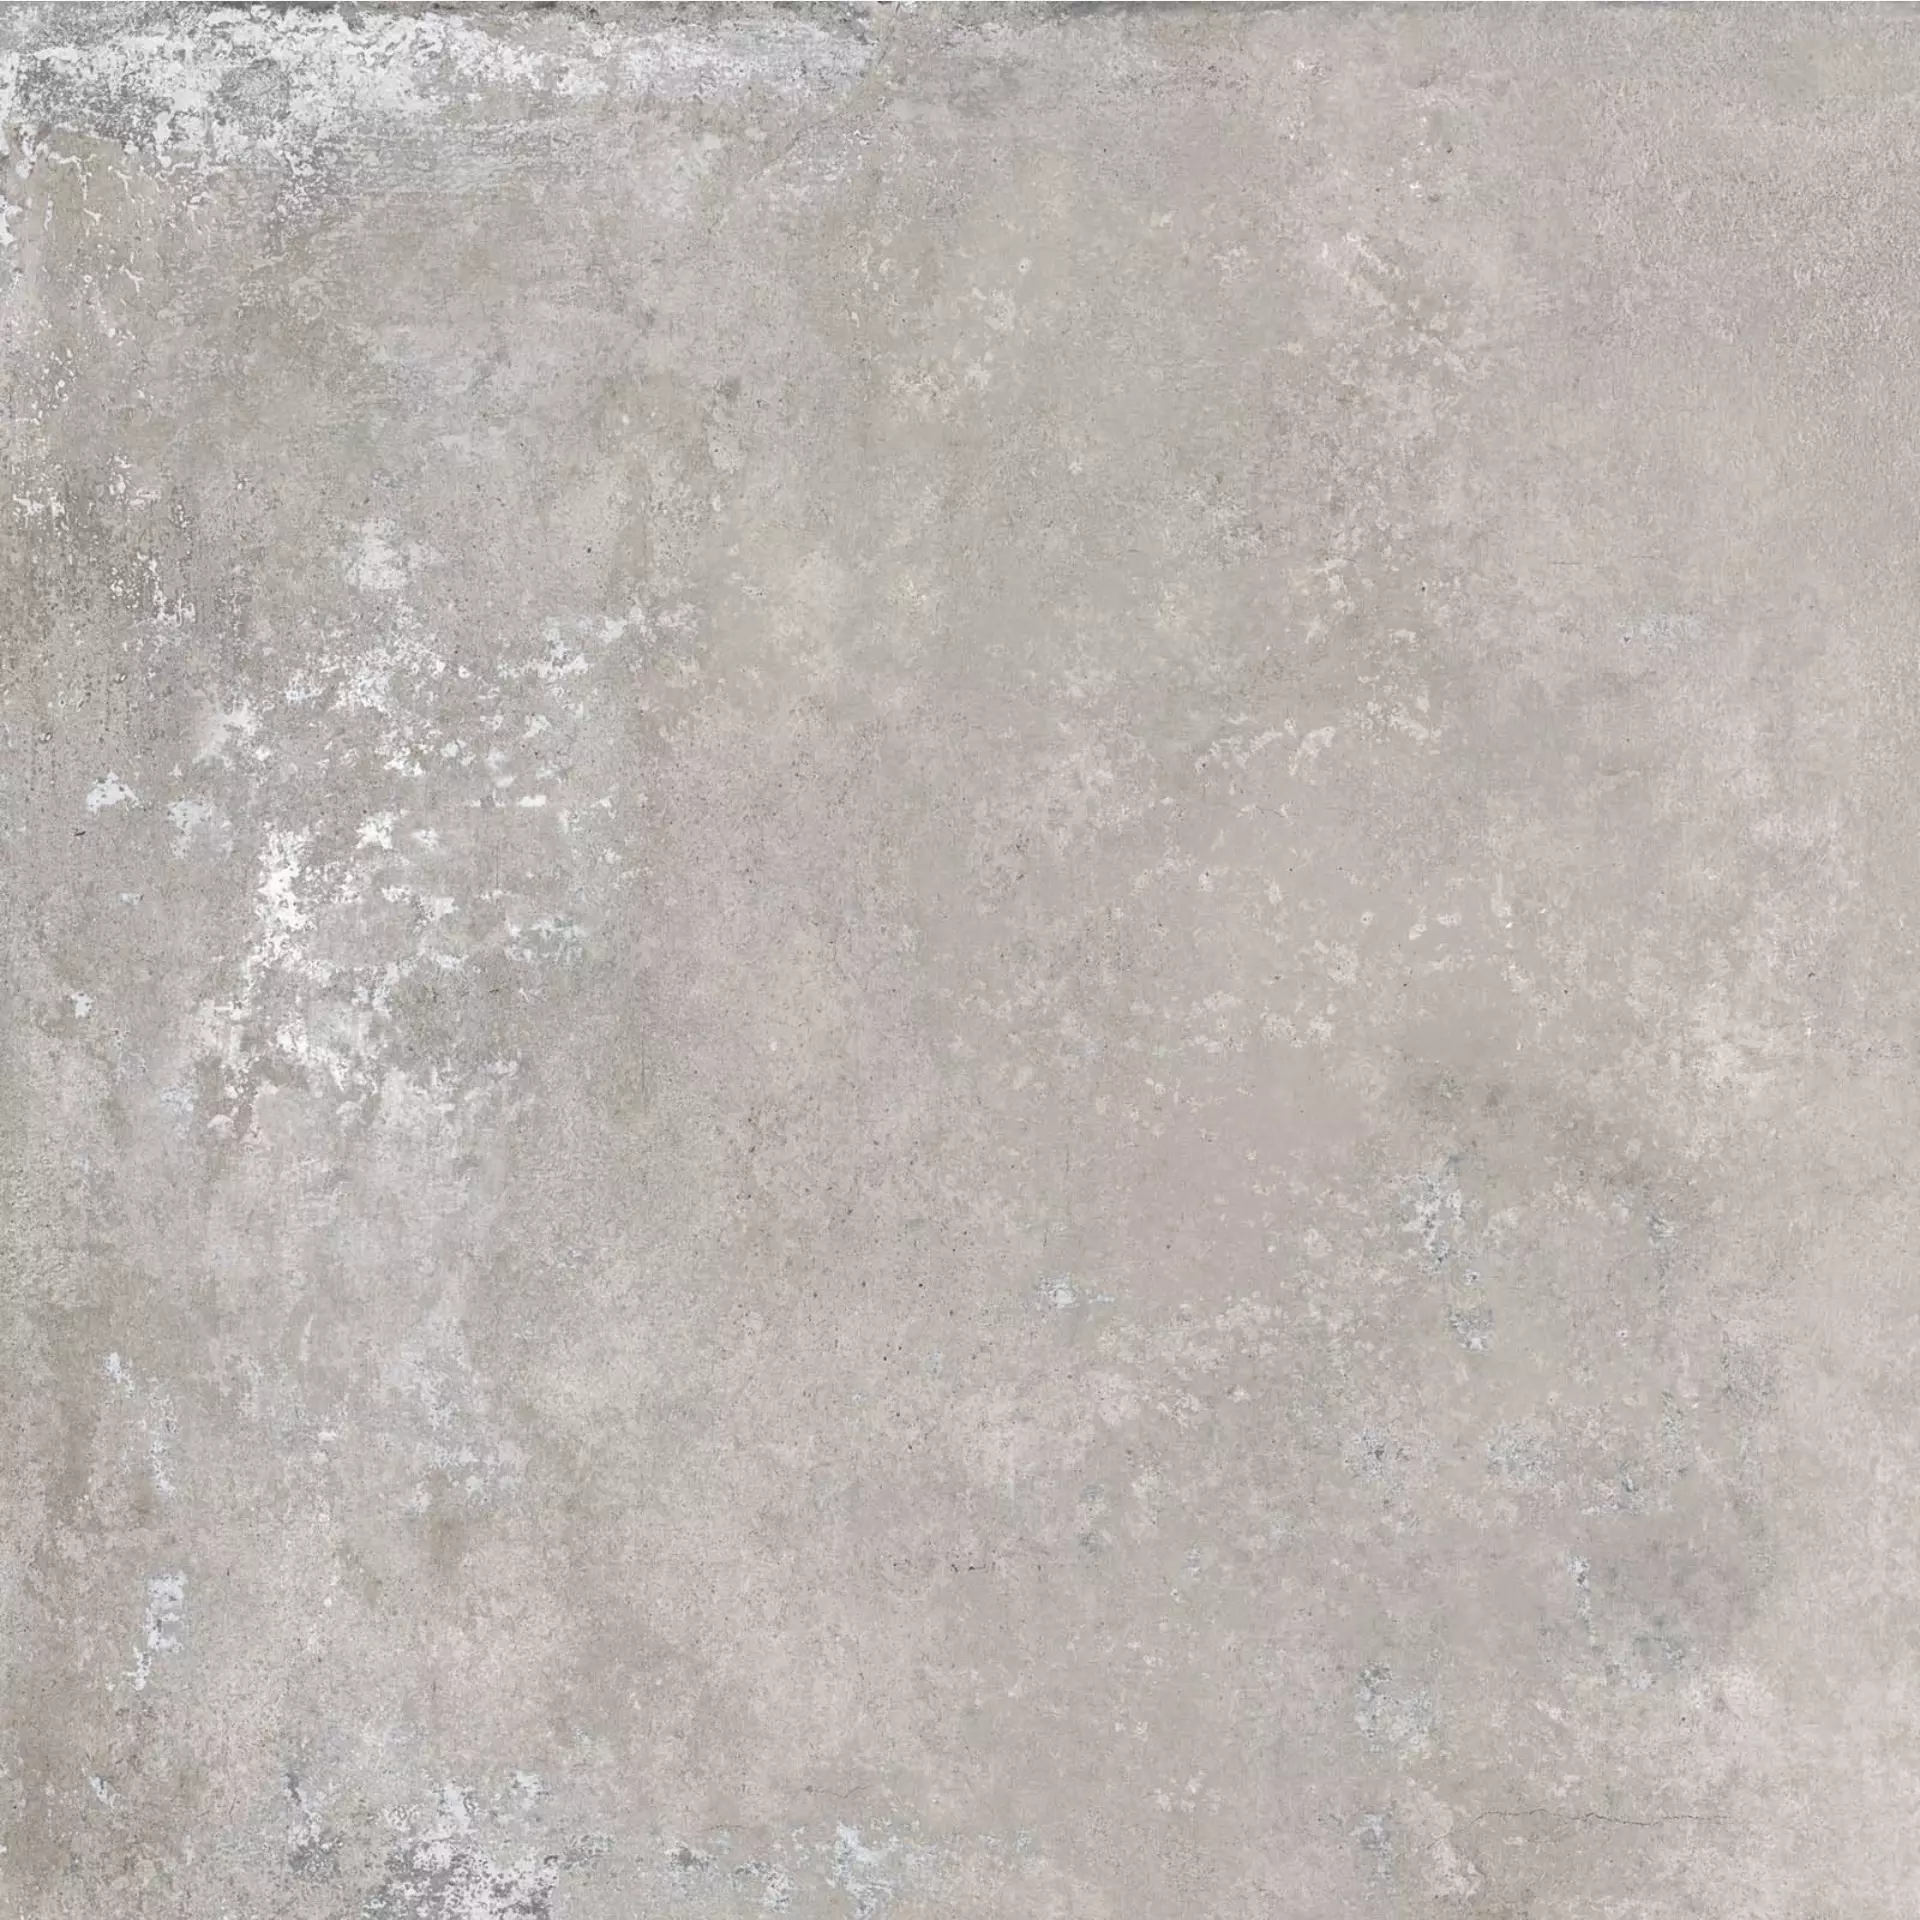 ABK Ghost Grey Naturale PF60005056 90x90cm rectified 8,5mm